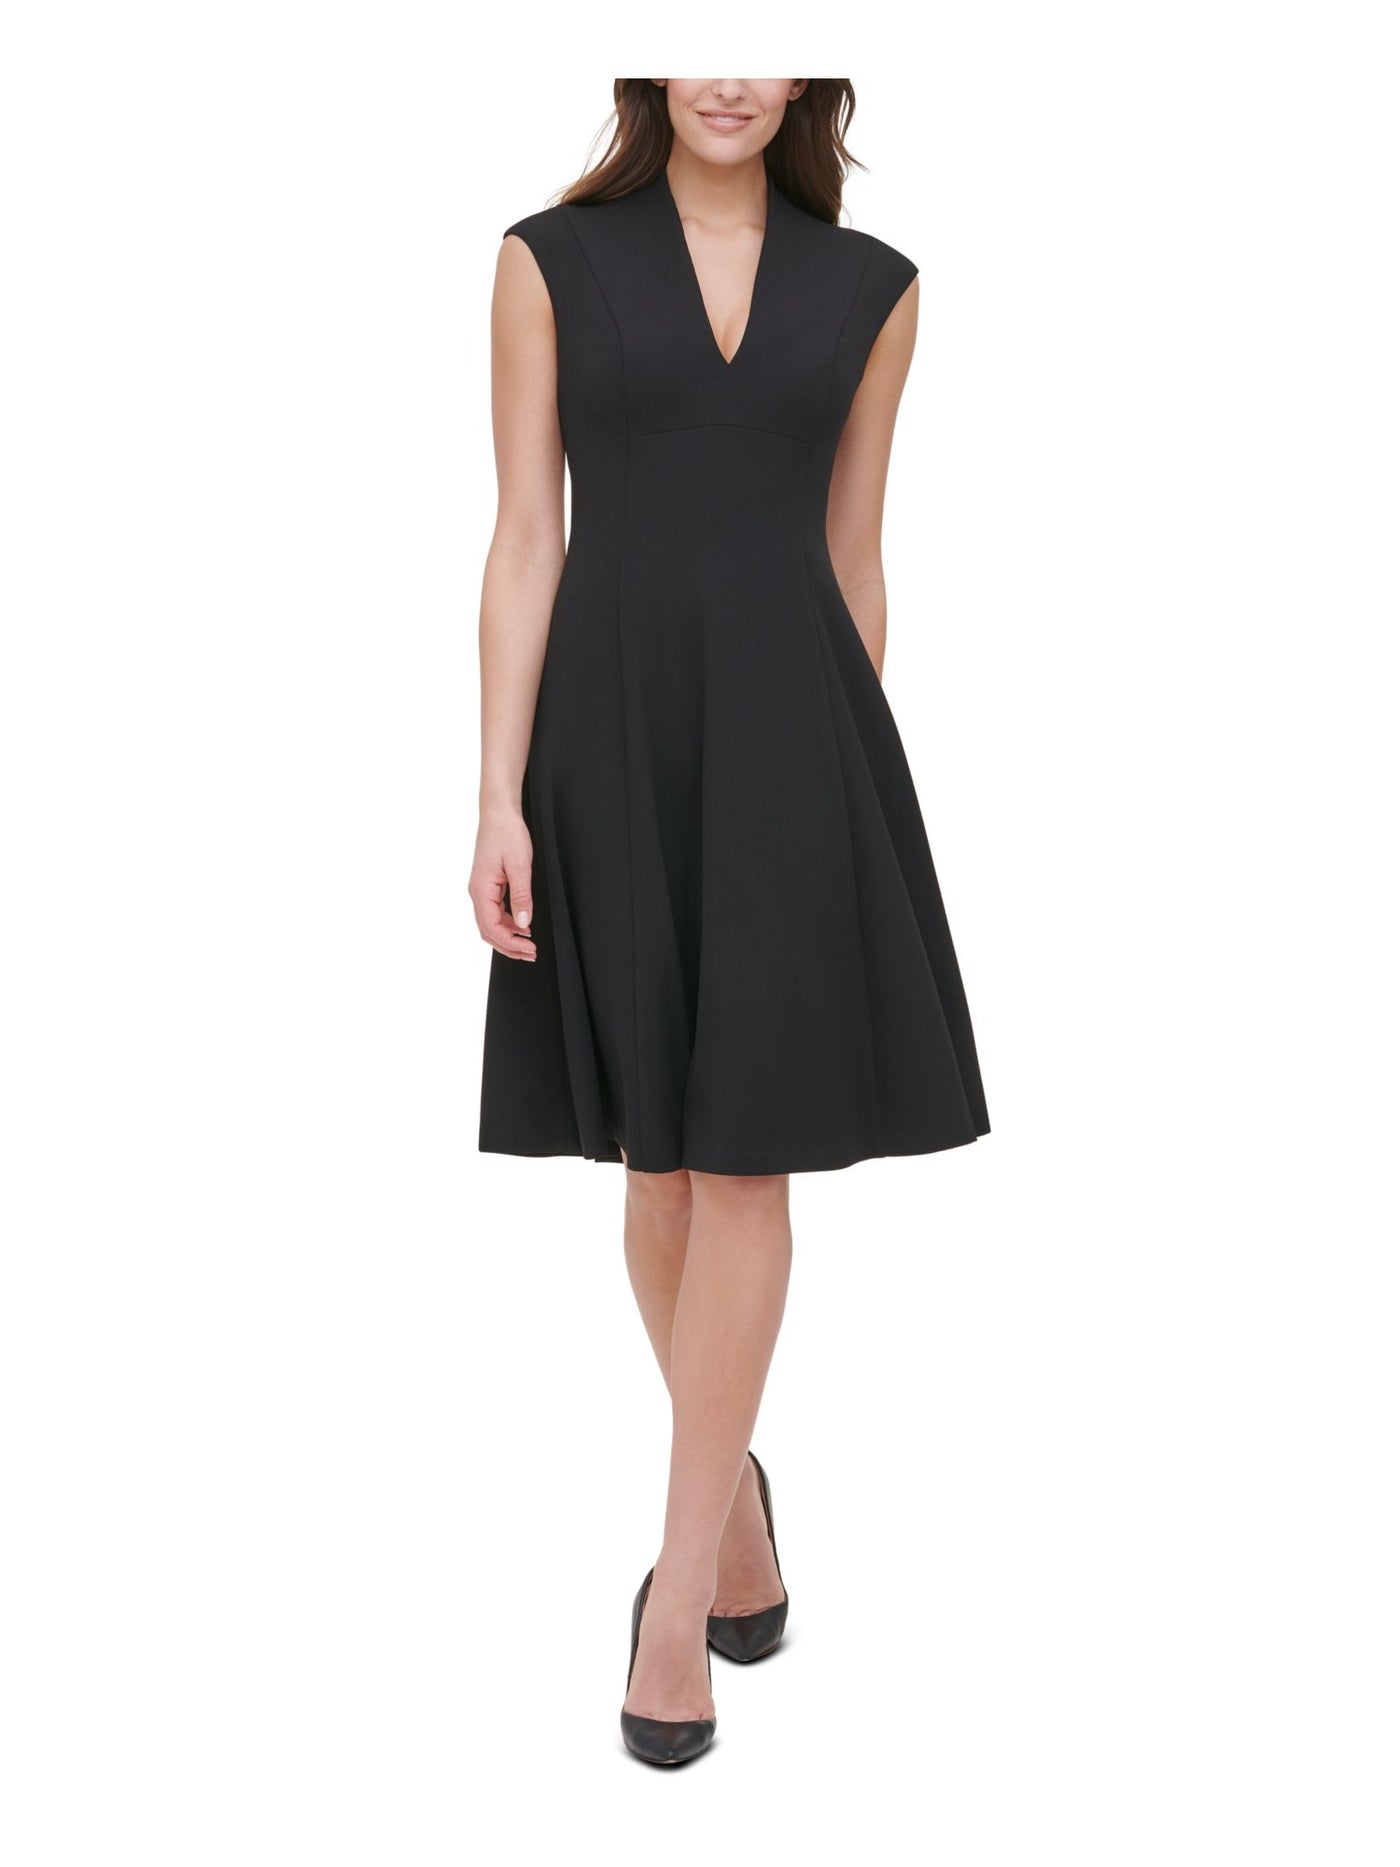 TOMMY HILFIGER Womens Black Zippered Seamed Cap Sleeve V Neck Below The Knee Wear To Work Fit + Flare Dress 8